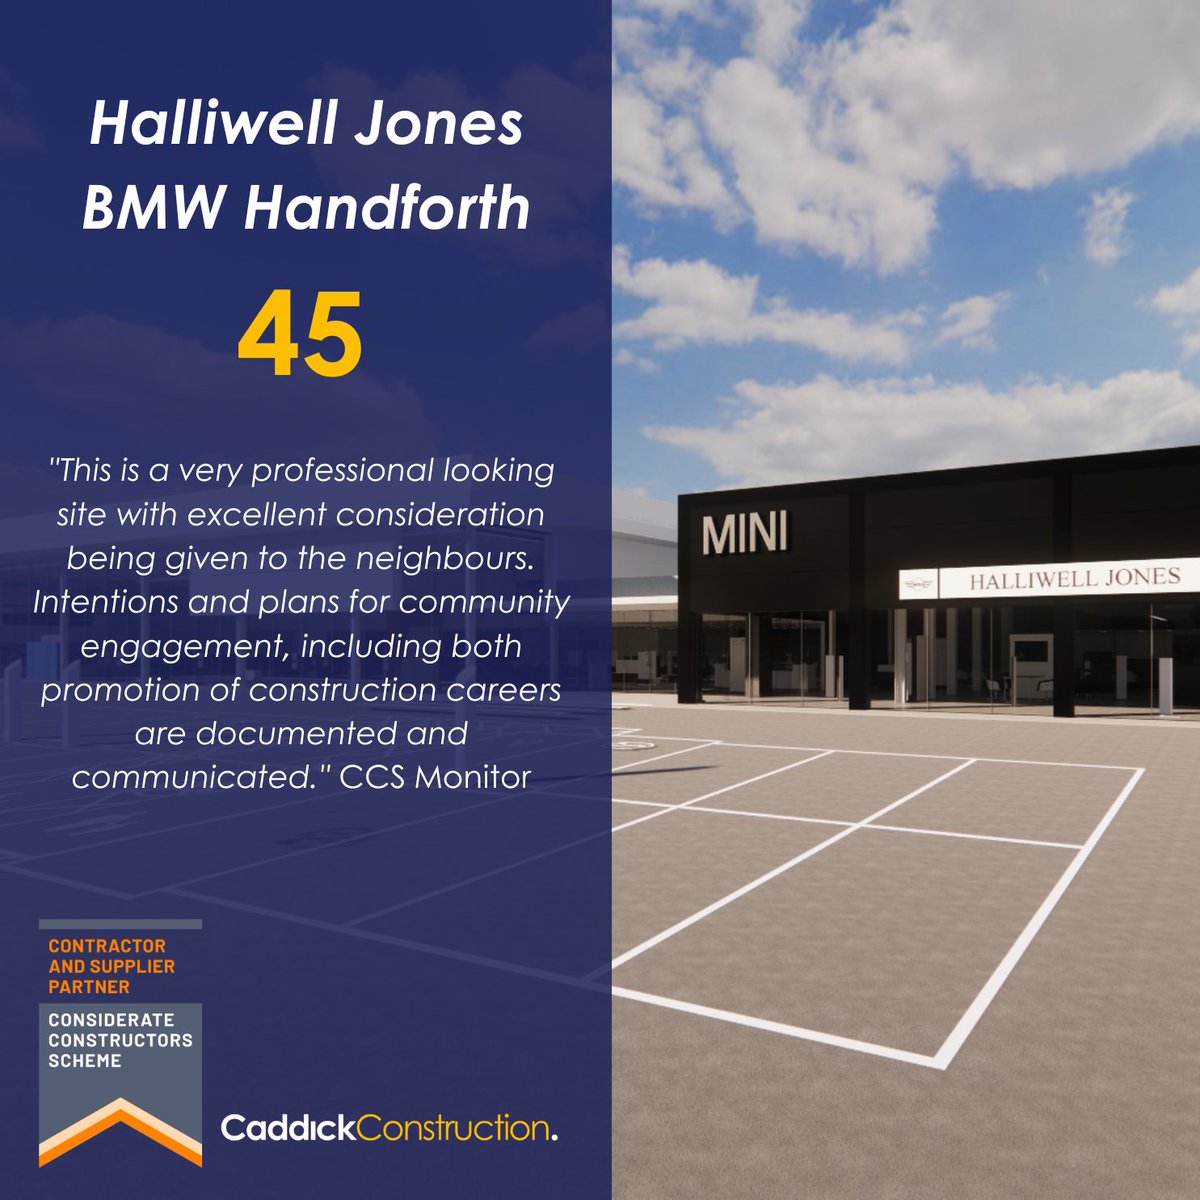 Congratulations to our team and supply chain partners at #BMWHandforthDean, who have achieved a fantastic score of 45 on their recent @ccscheme visit. 👏 #PlacesforLife #LoveConstruction #CCS